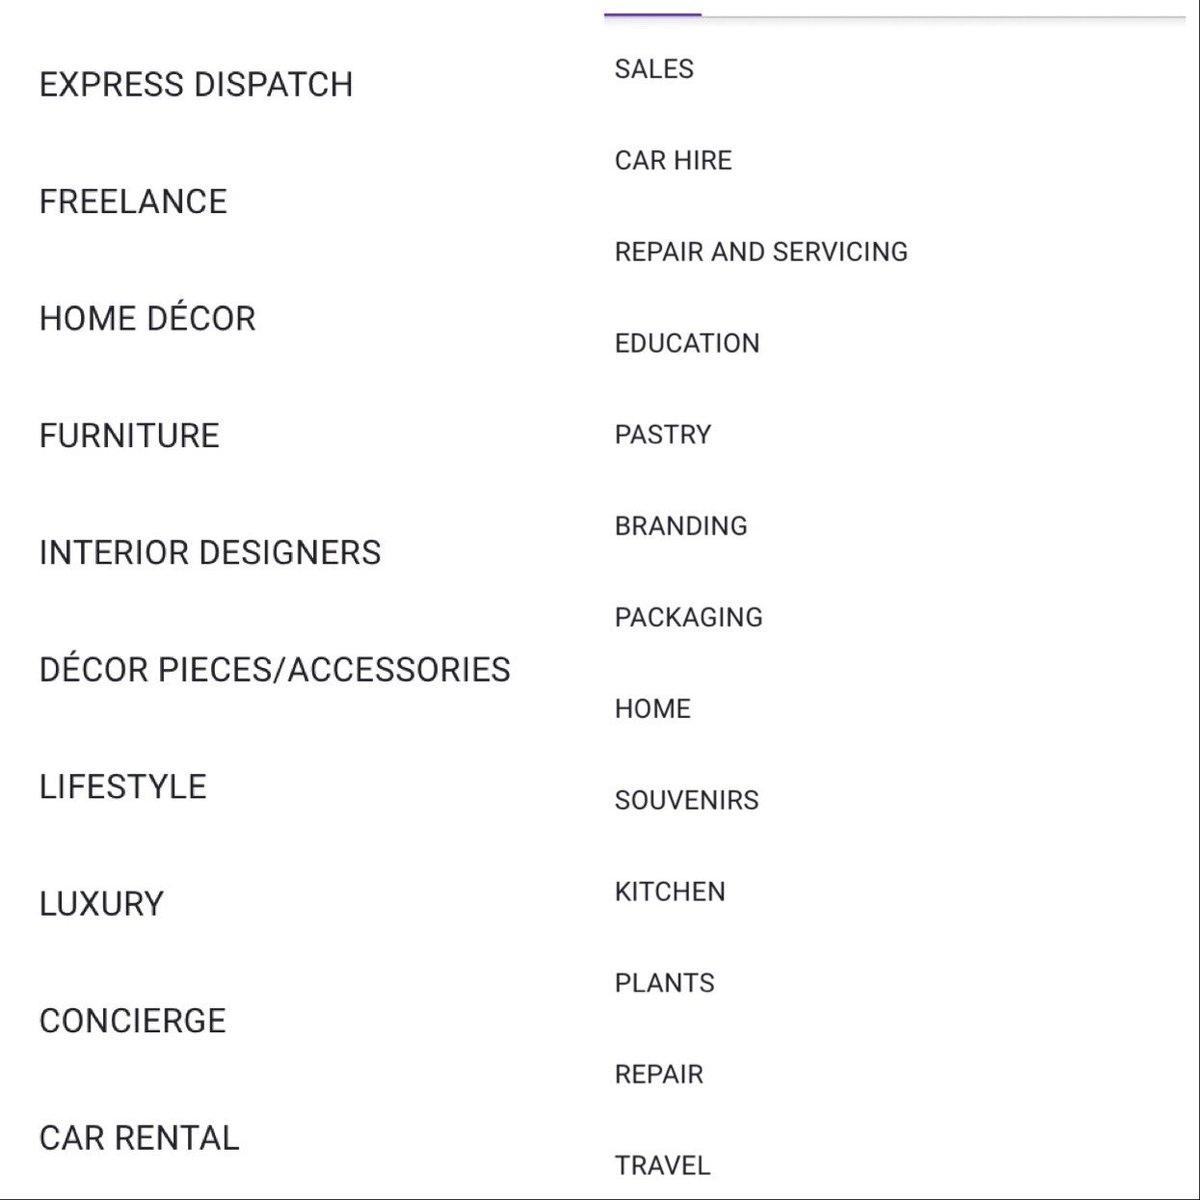 PLEASE SERVICE VENDORS YOU ARE NOT EXEMPTED. CHECK THE PICTURES FOR ALL AVAILABLE CATEGORIES